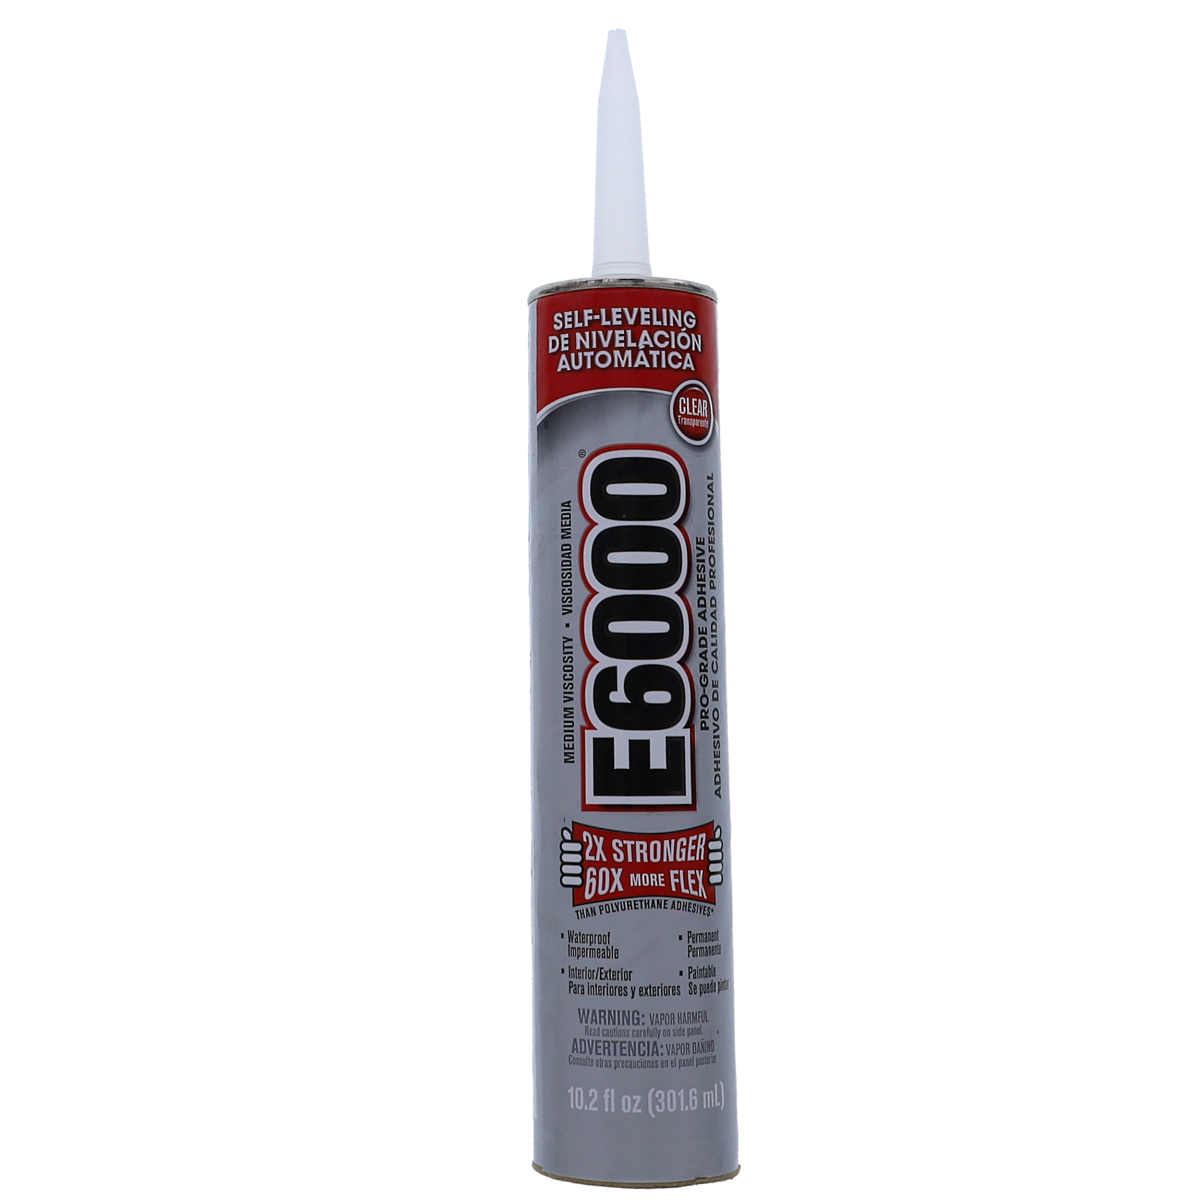 Eclectic 232021 E6000 Self-Leveling Industrial Sealant Clear 10.2 oz. Cartridge